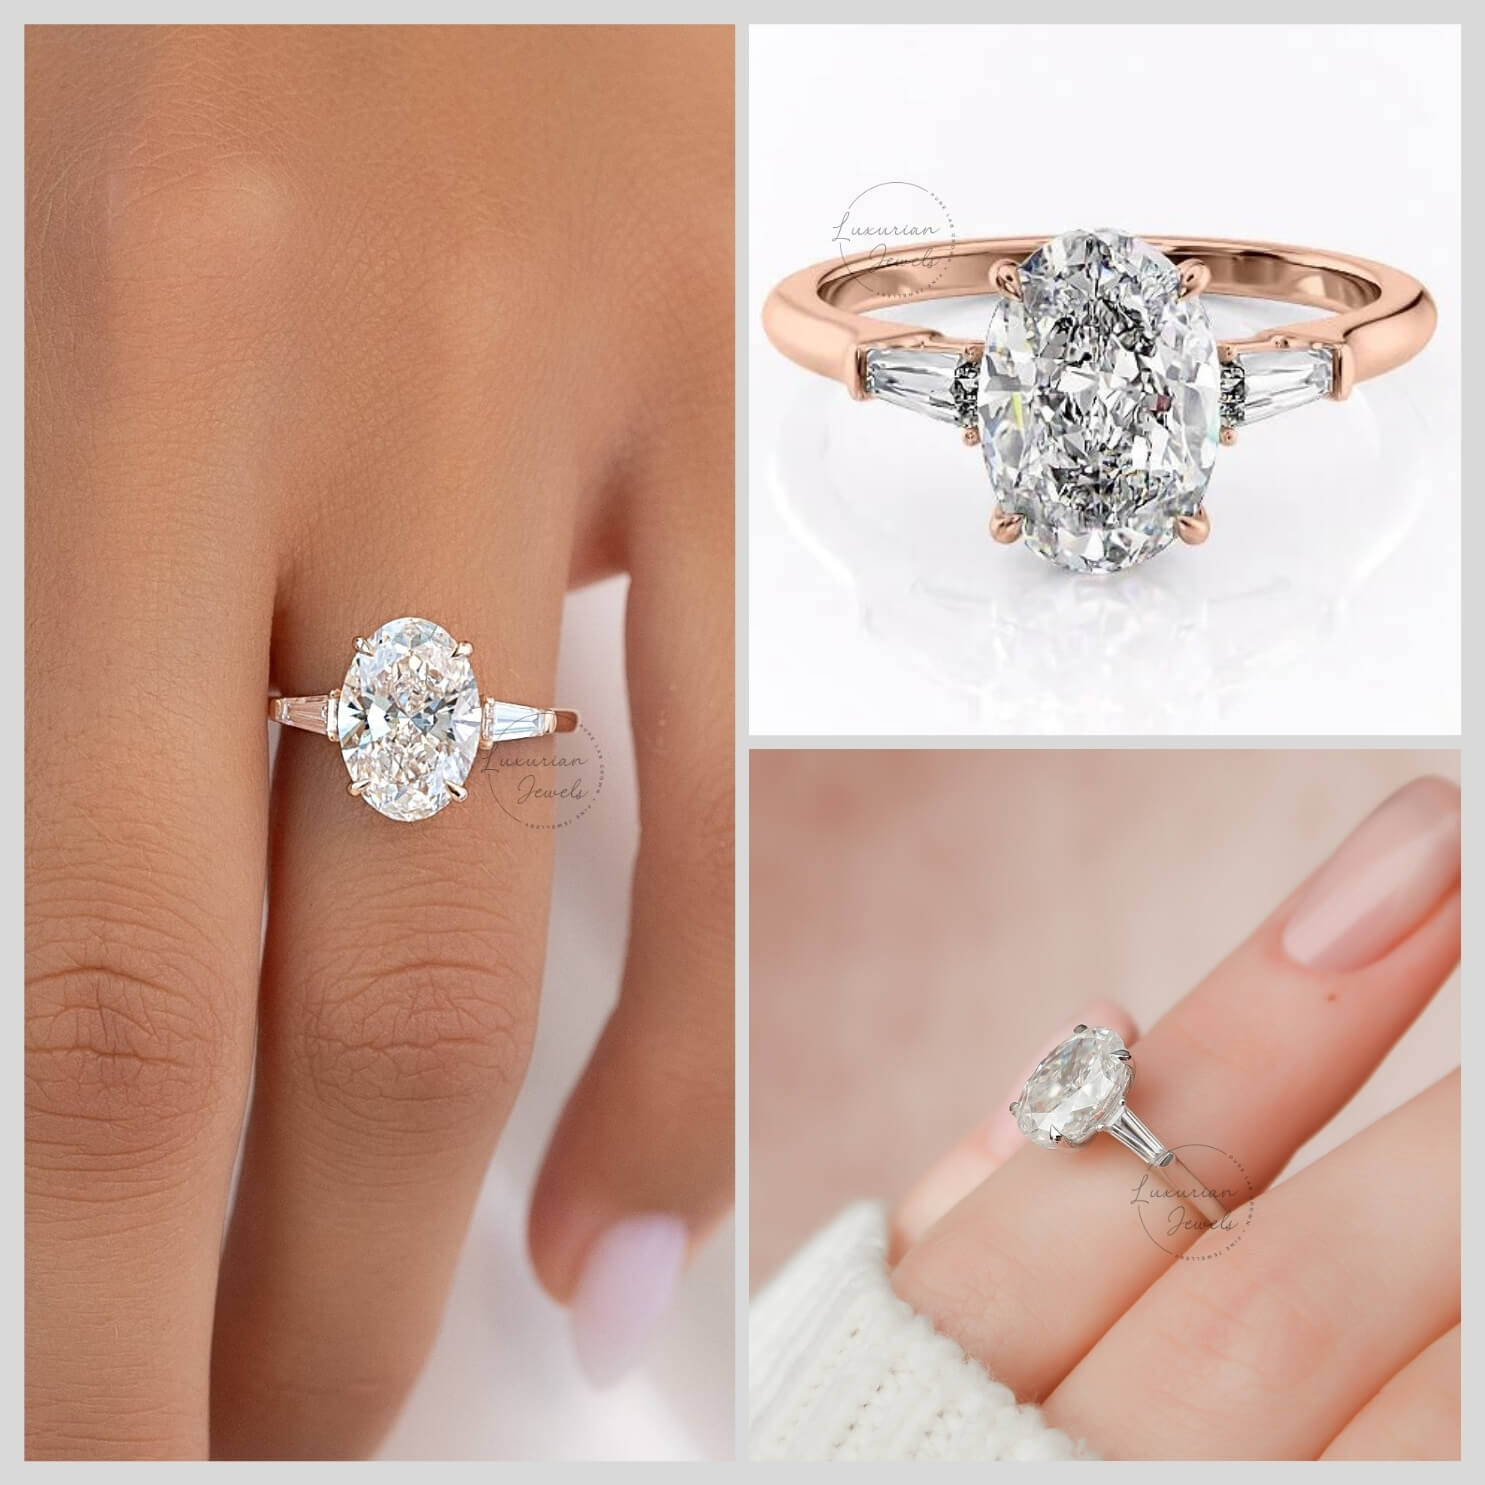  Oval And Tapered Baguette Diamond Ring